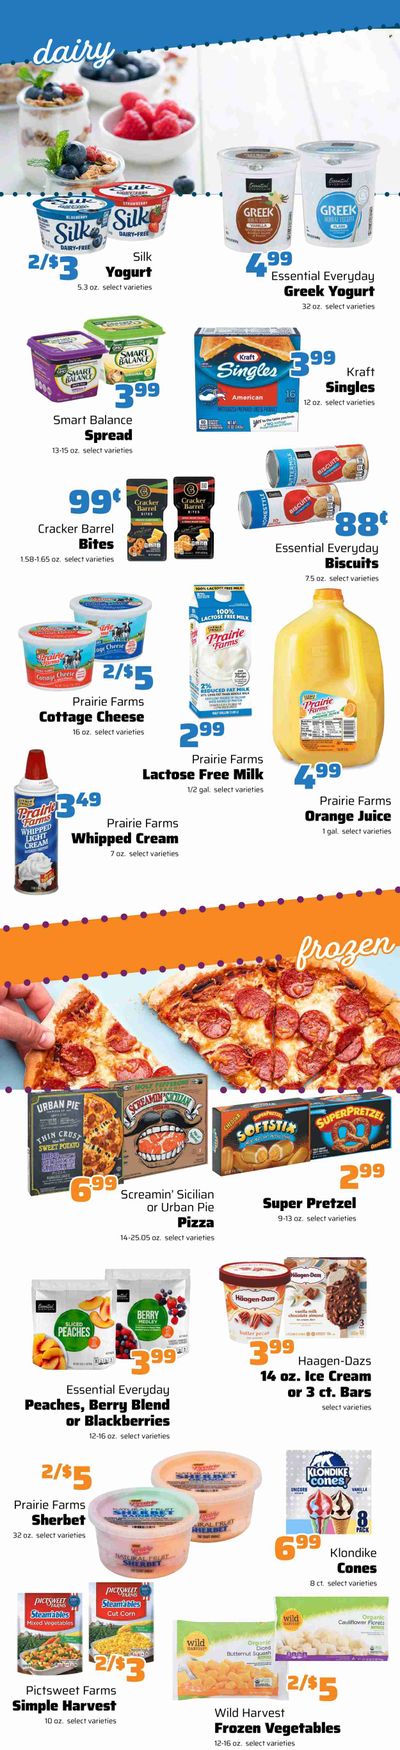 County Market (IL, IN, MO) Weekly Ad Flyer Specials October 19 to October 25, 2022